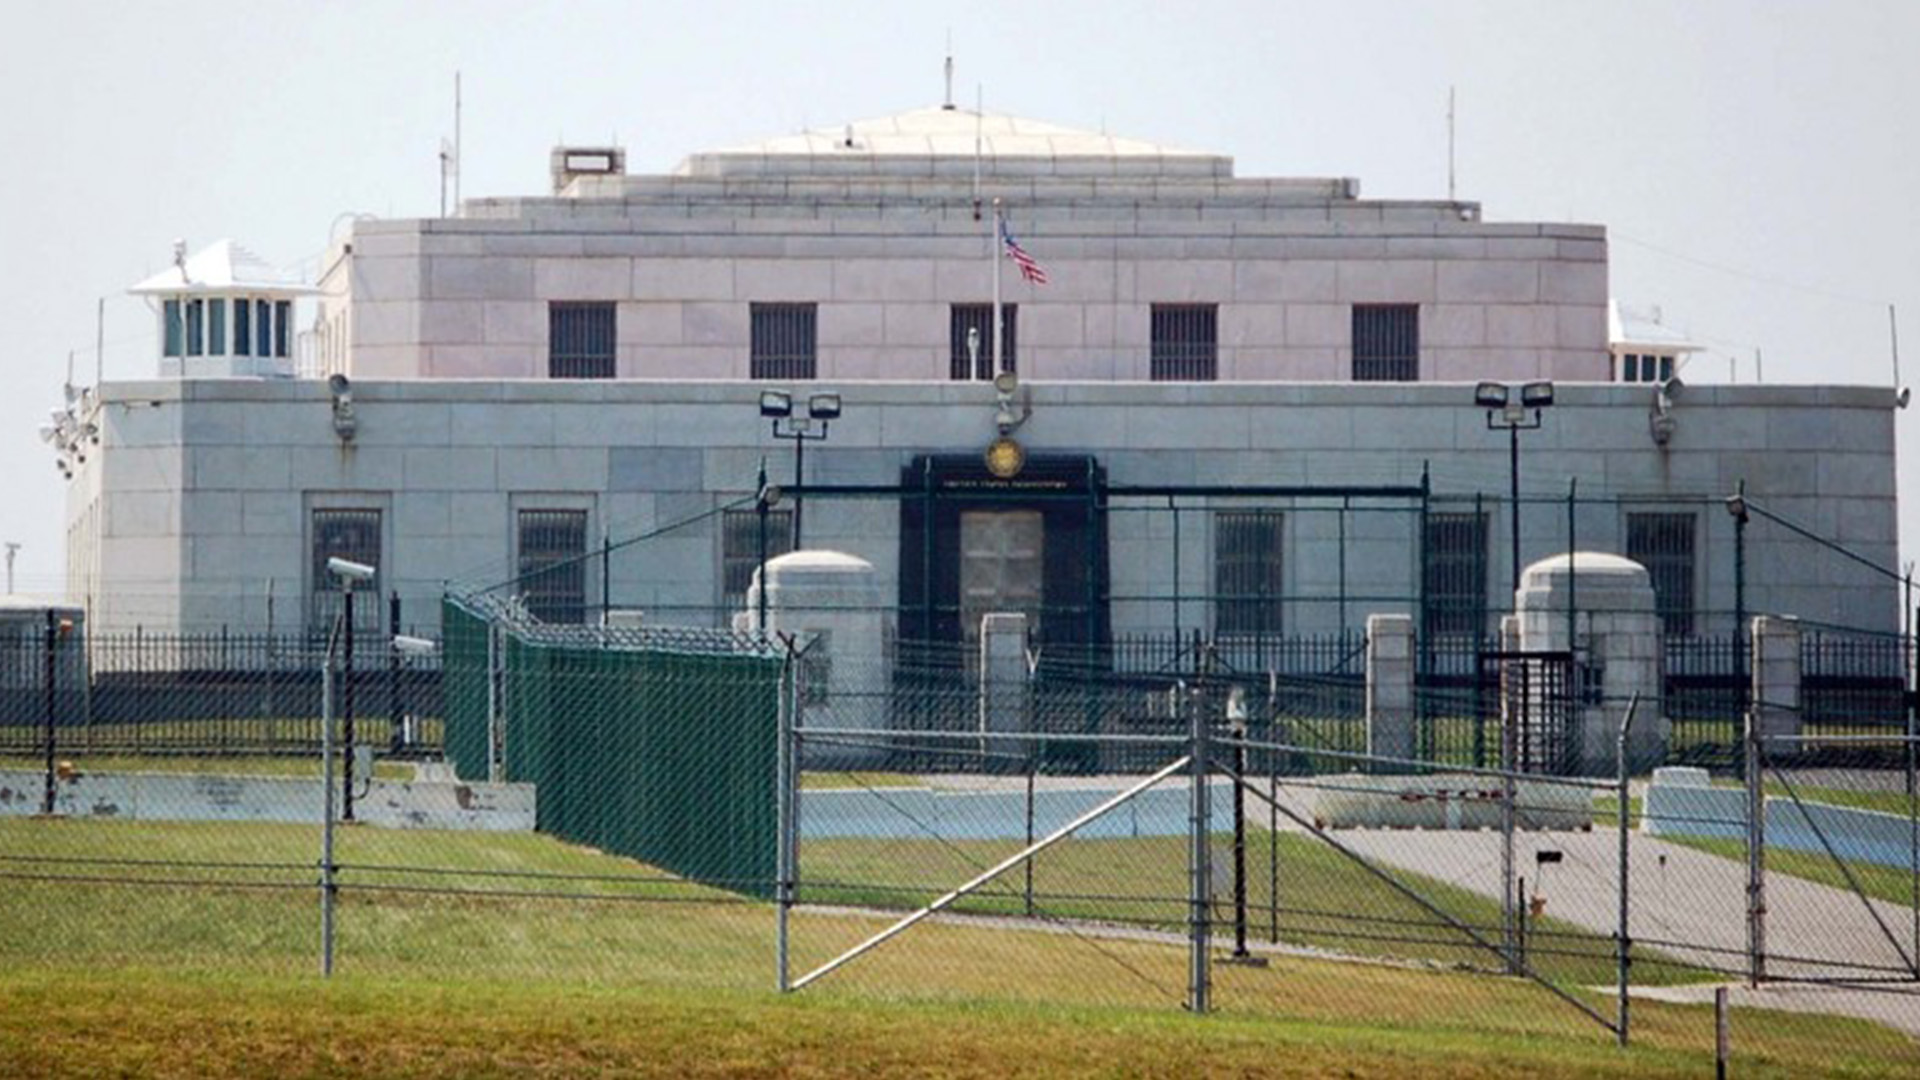 Fort Knox, the military institution in Kentucky where the United States gold reserves are kept, is such a secure facility that the very name has become synonymous with an impenetrable vault. There is much we, the public, don't know about Fort Knox, including how much gold - if any - is stored there.